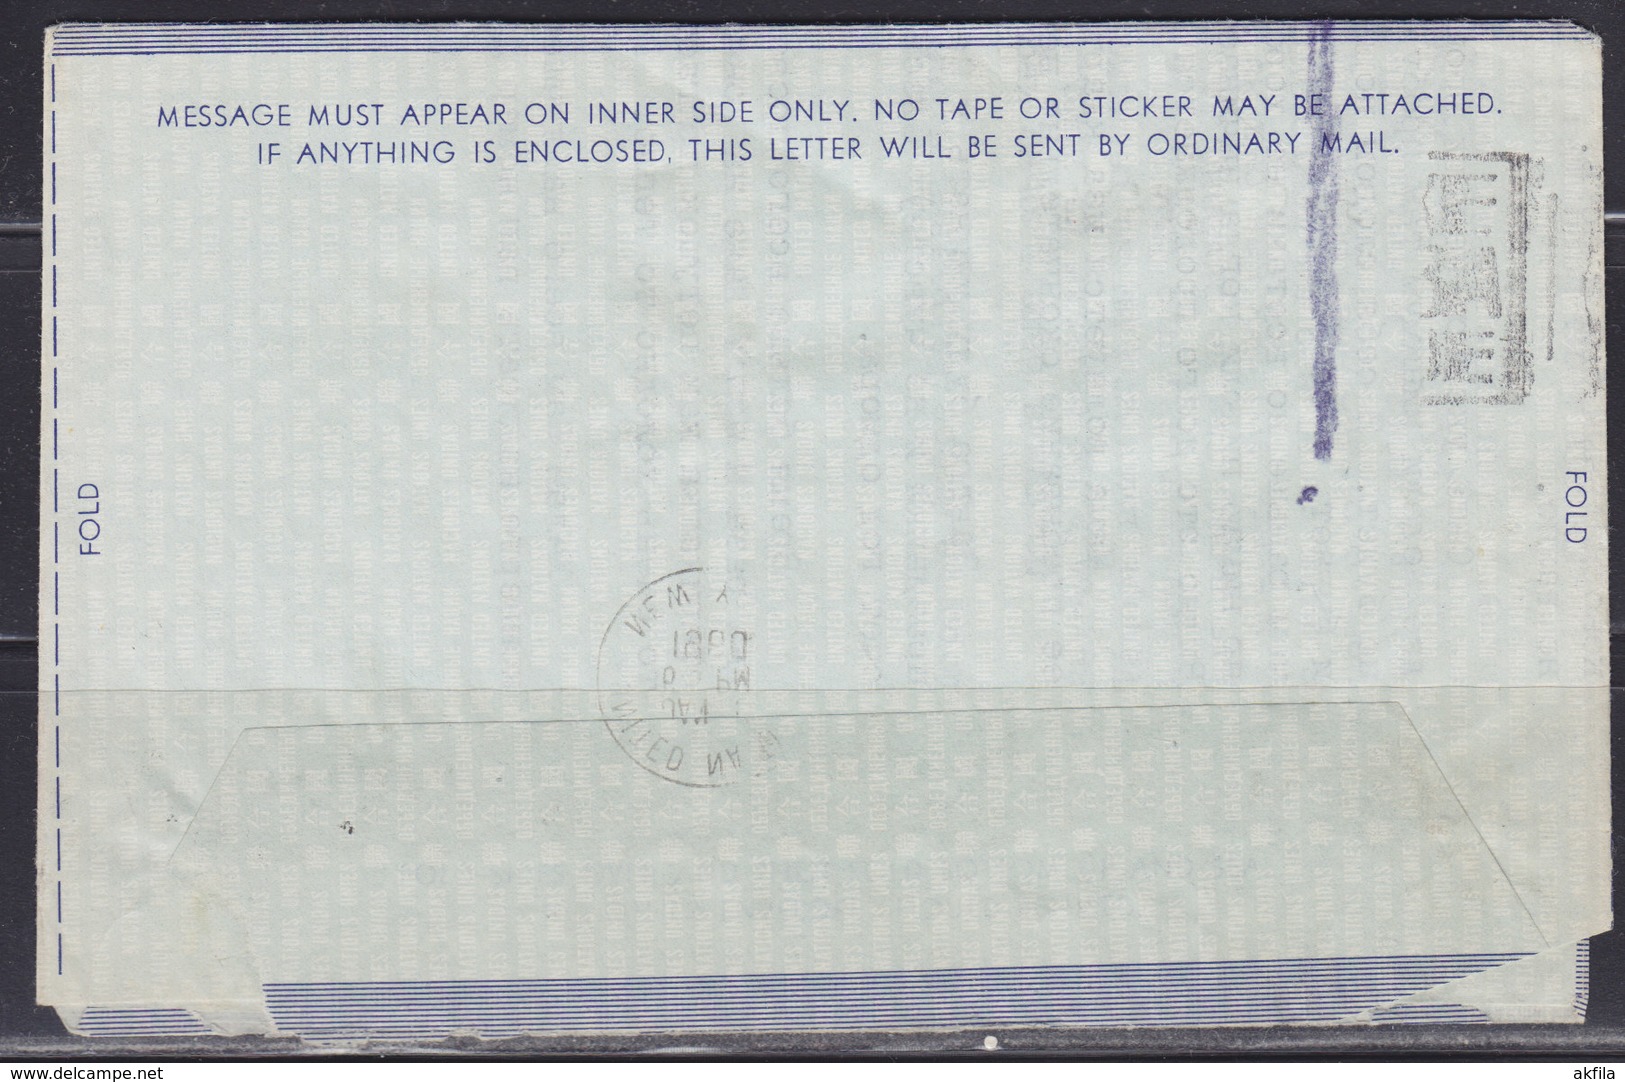 United Nations (New York) 1960 Air Letter (Aerogramme) To Beograd (YU) - Poste Aérienne